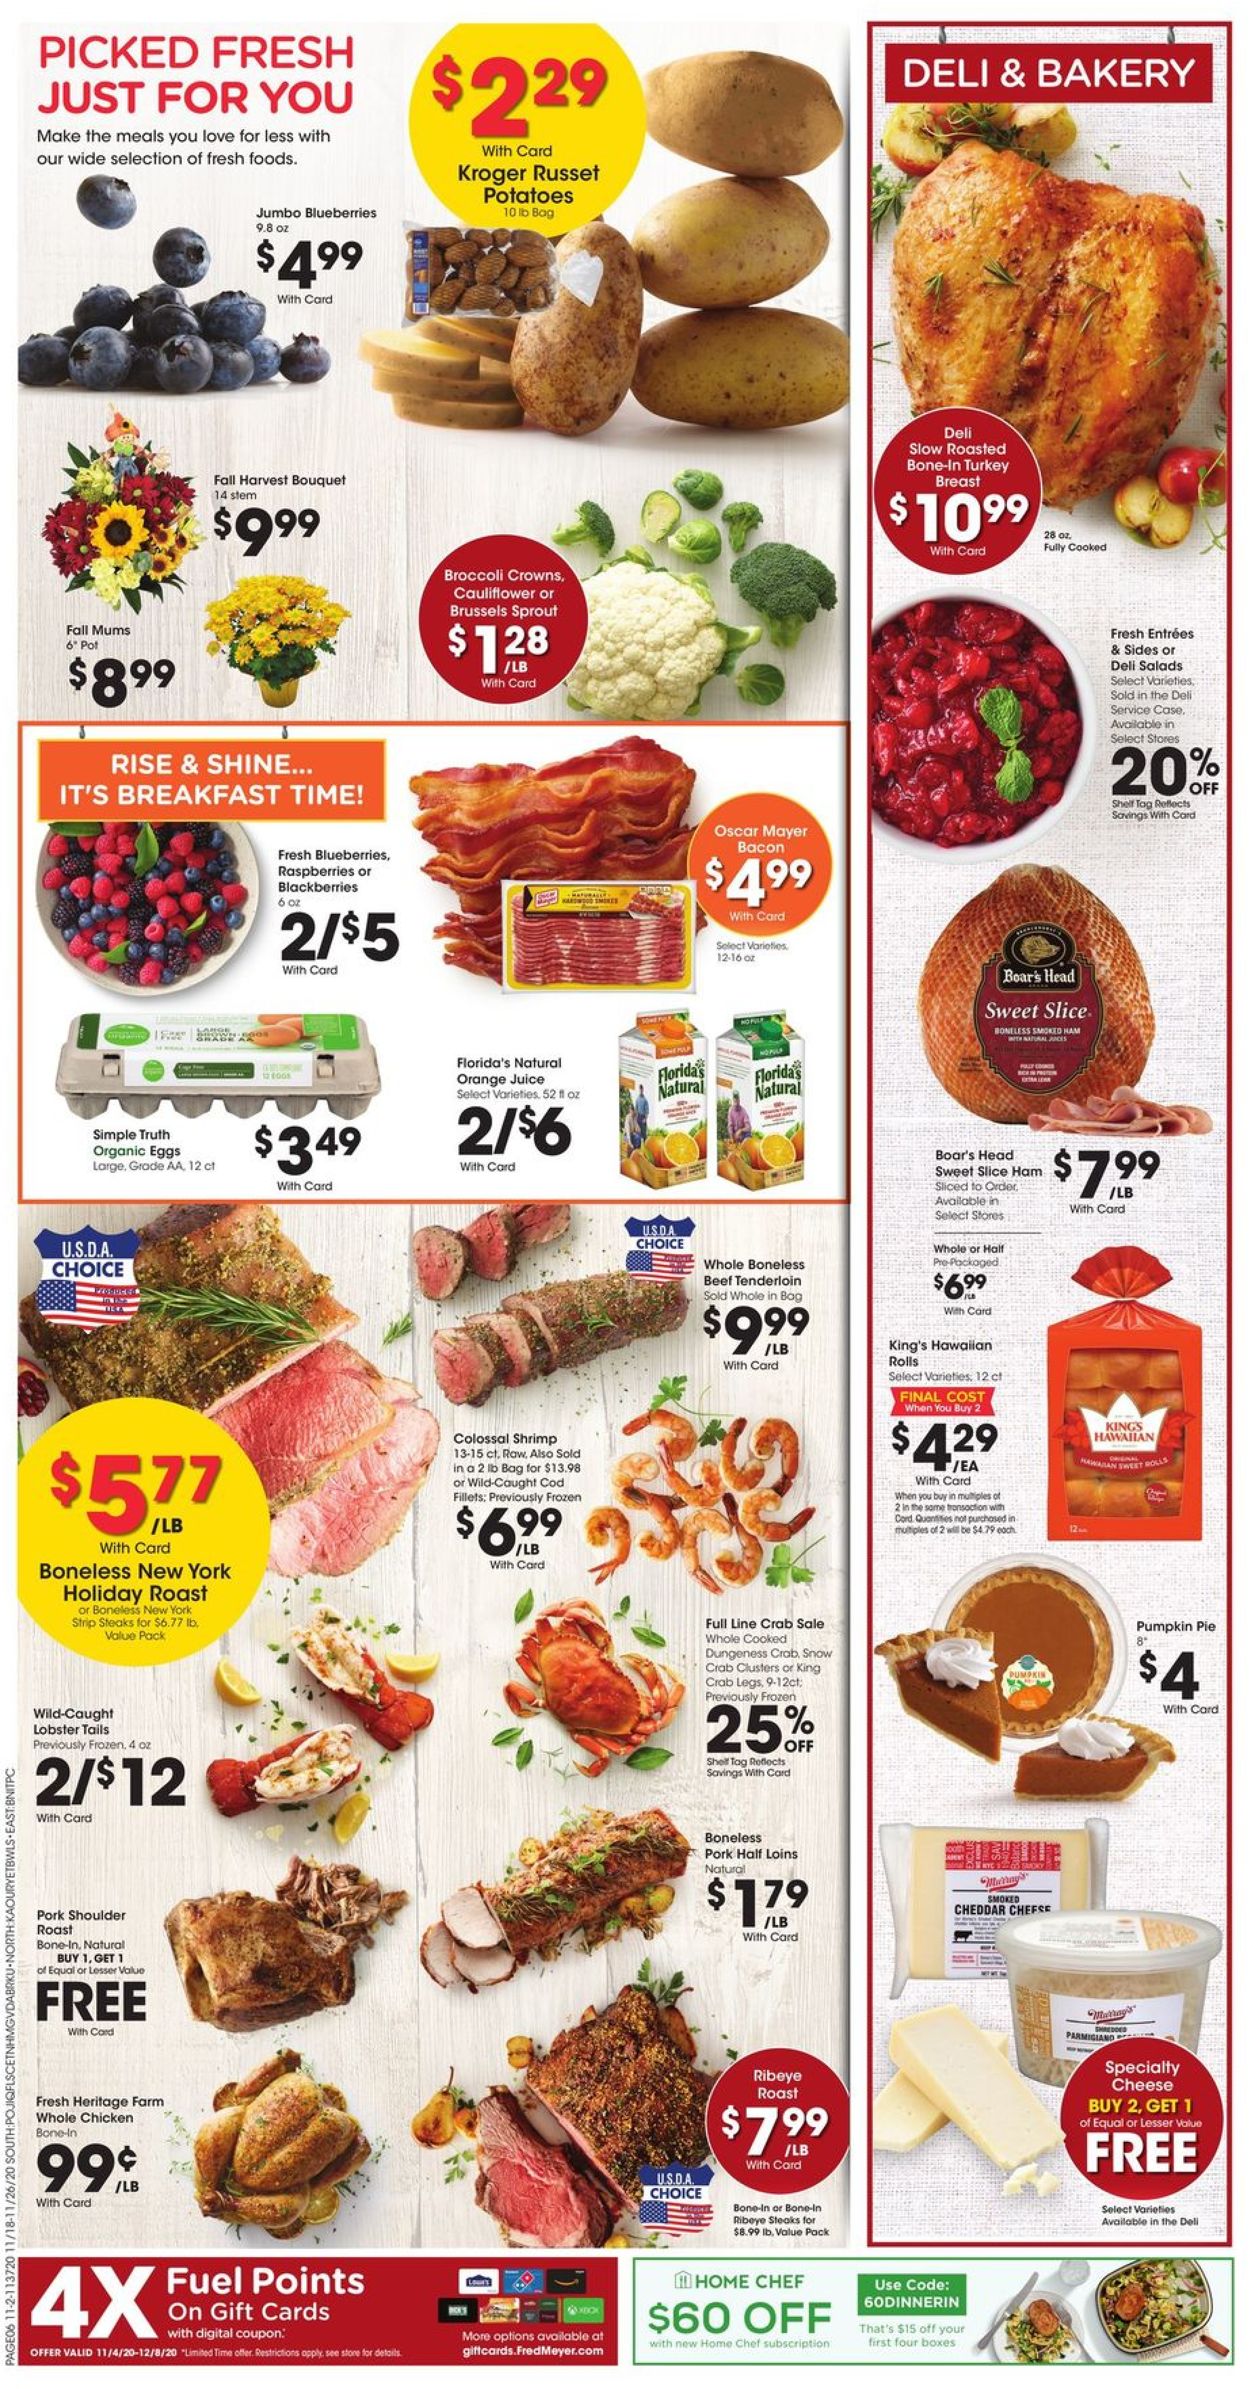 Fred Meyer Thanksgiving ad 2020 Weekly Ad Circular - valid 11/18-11/26/2020 (Page 6)